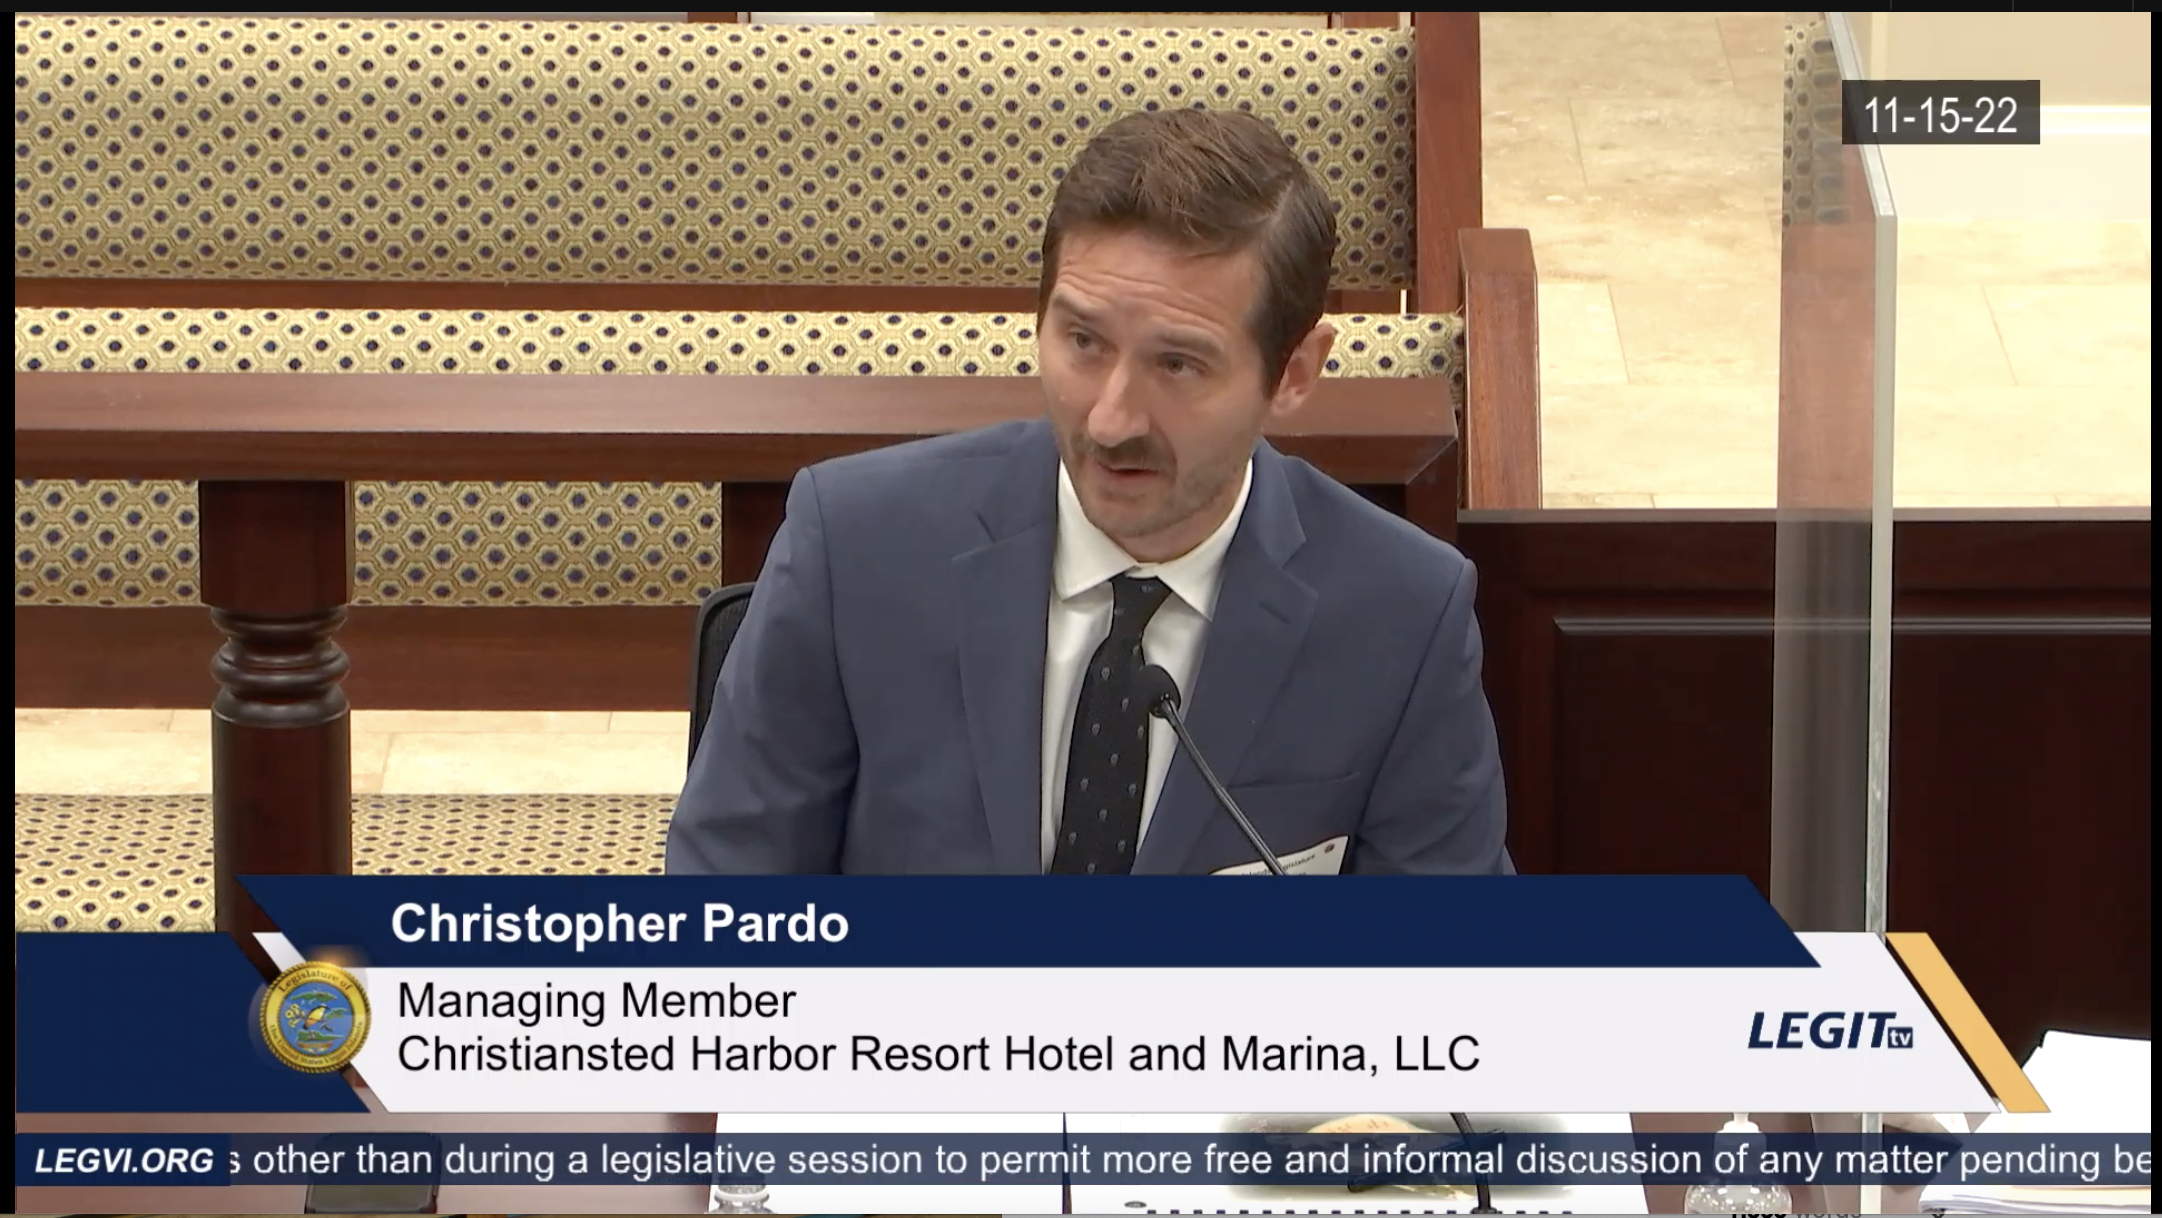 Christopher Pardo, managing member of Christiansted Harbor Resort Hotel and Marina, LLC, testifies before the Senate on Tuesday. (Screenshot from livestream)